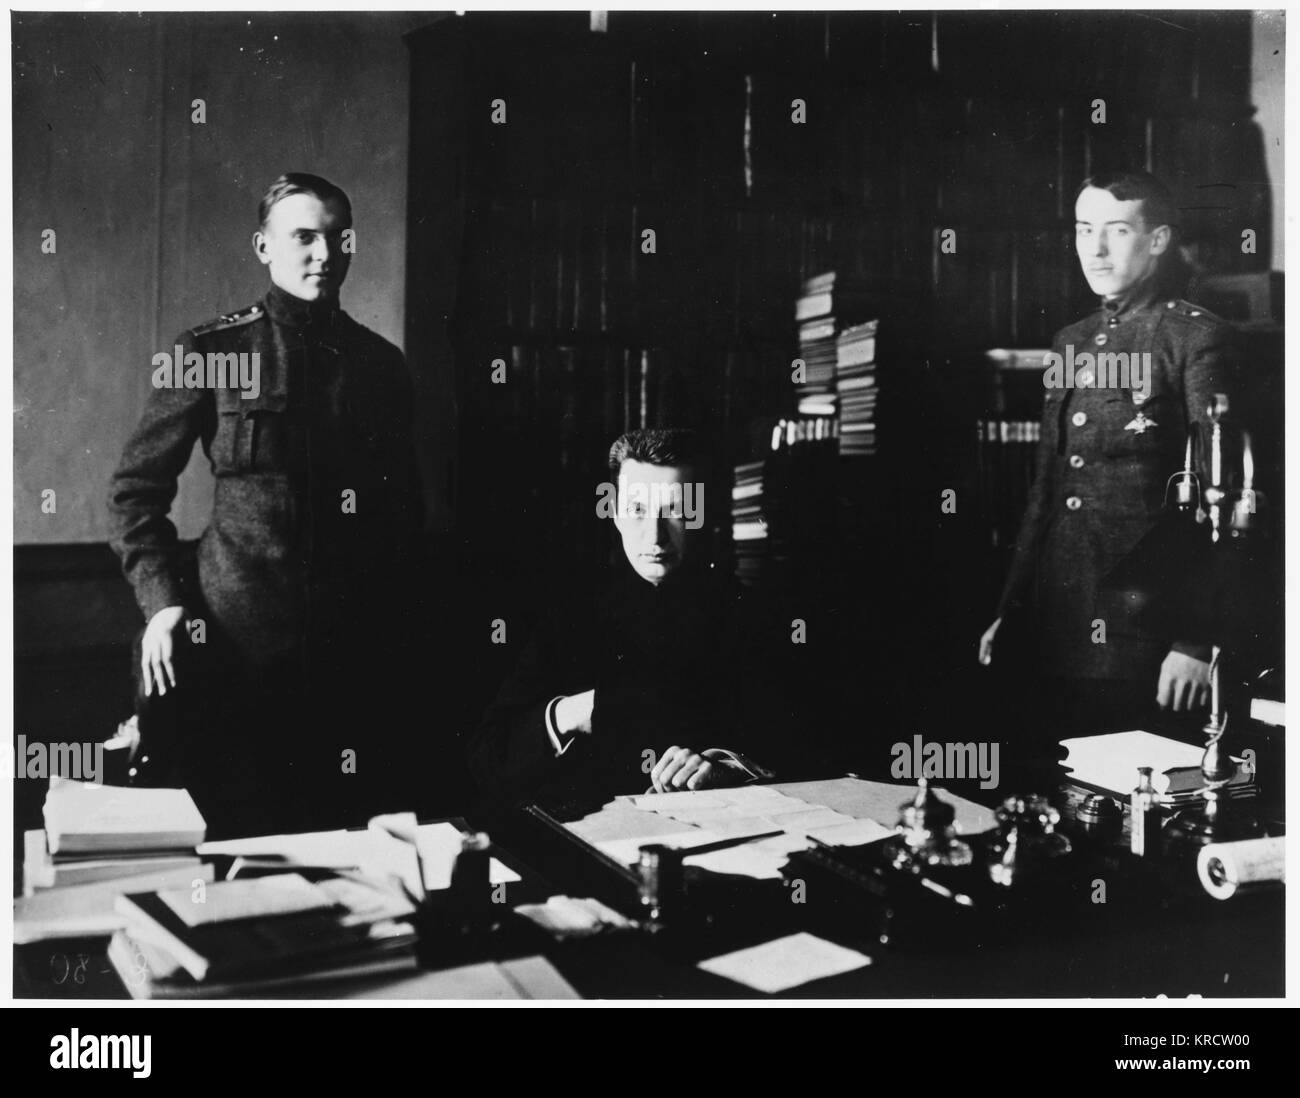 ALEKSANDR FYODOROVICH KERENSKY Russian Revolutionary leader with two of his assistants in 1917 Date: 1881 - 1970 Stock Photo